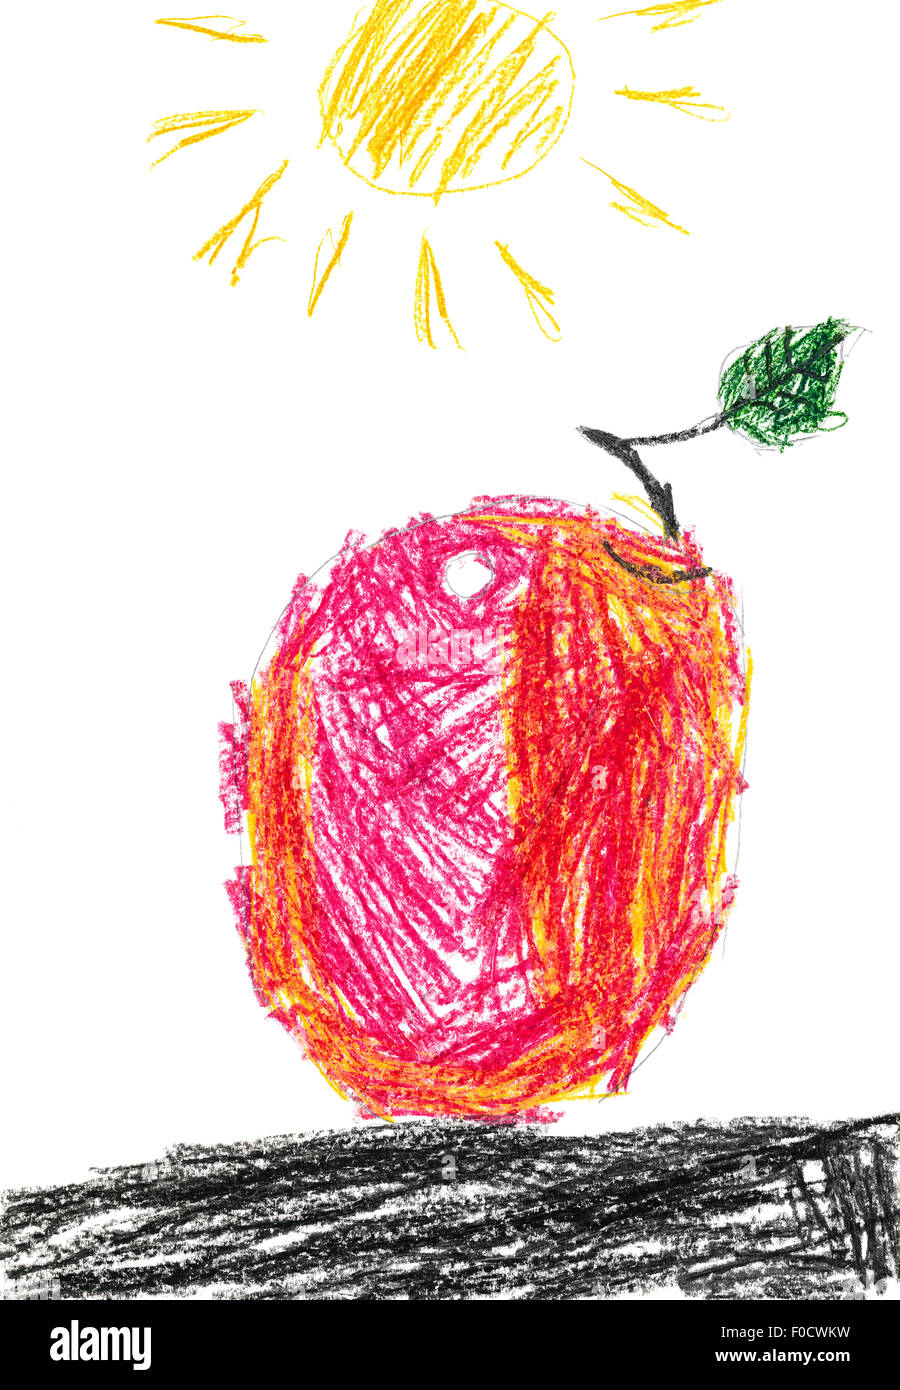 red apple and sun. children drawing by pencil Stock Photo